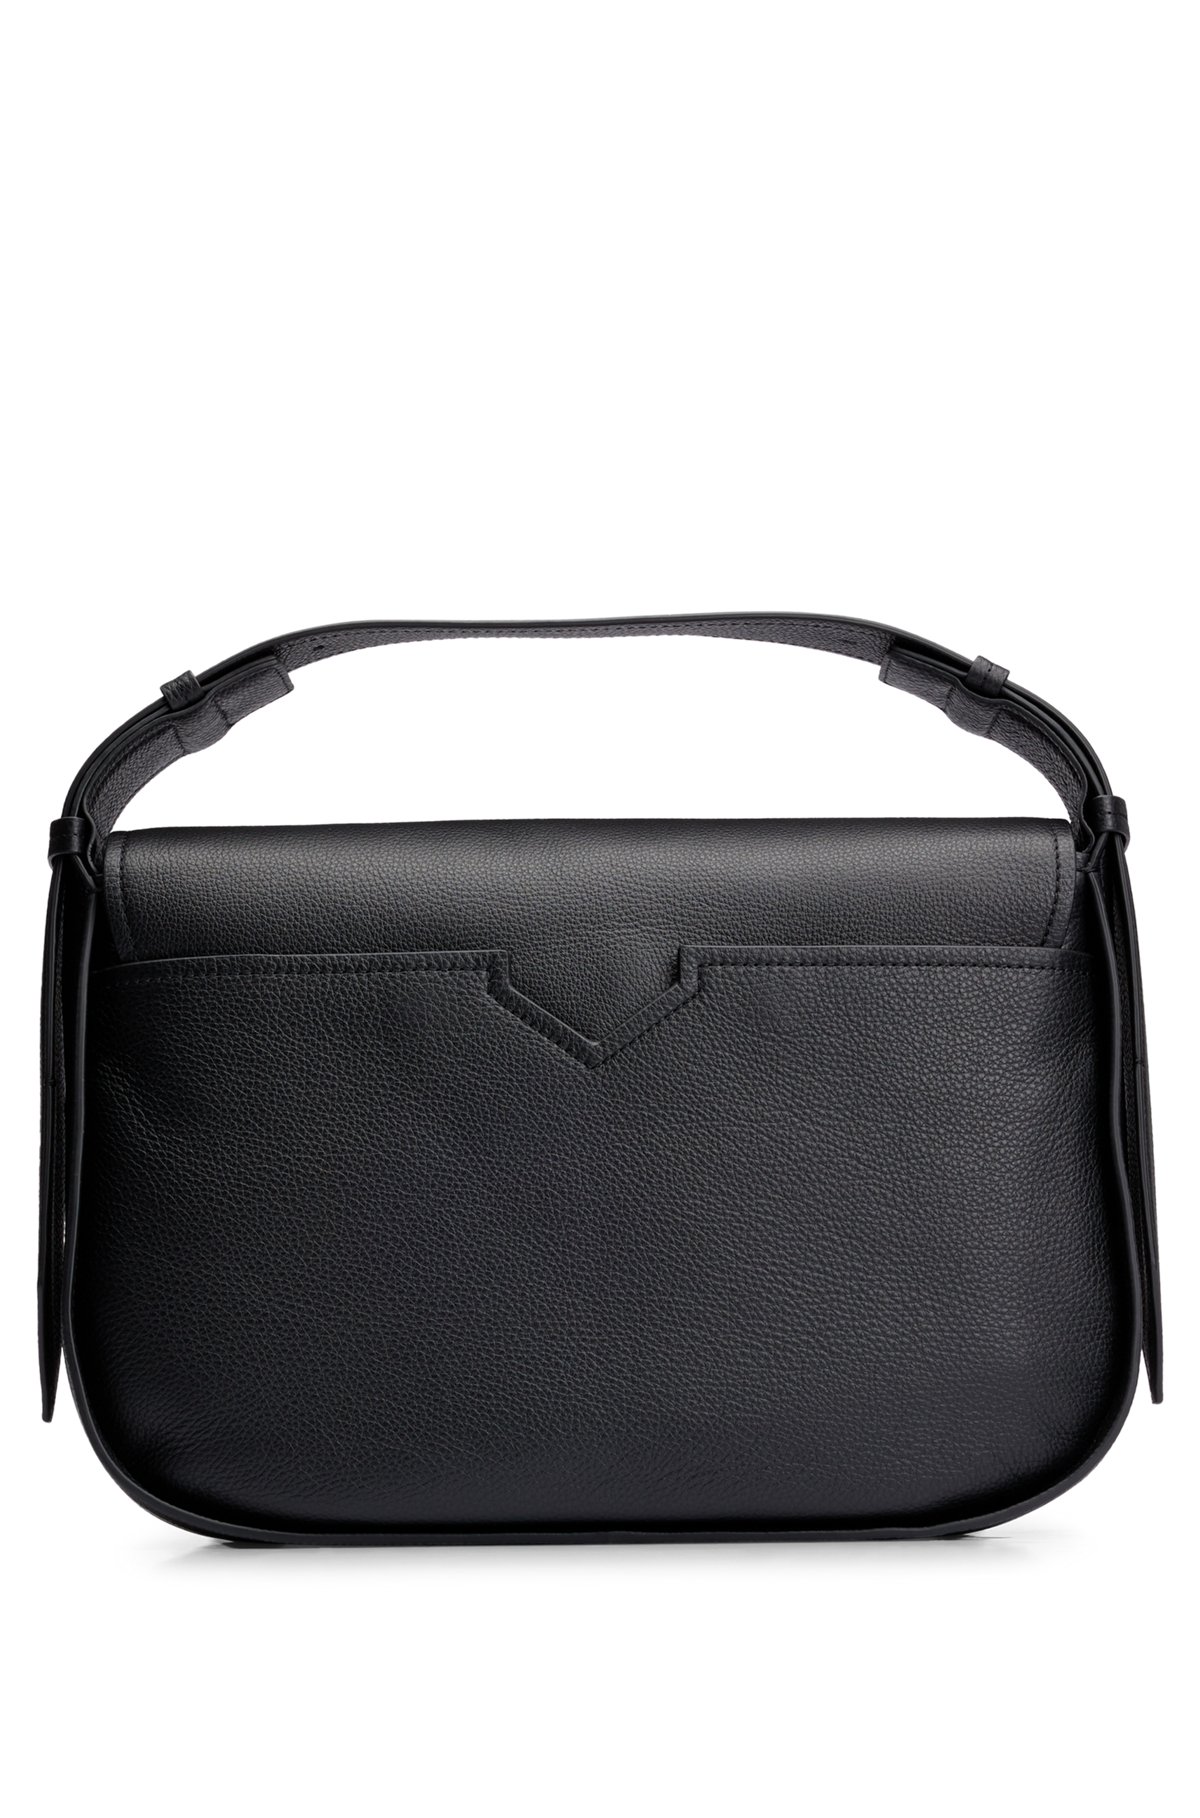 Grained-leather crossbody bag with embossed logo, Black